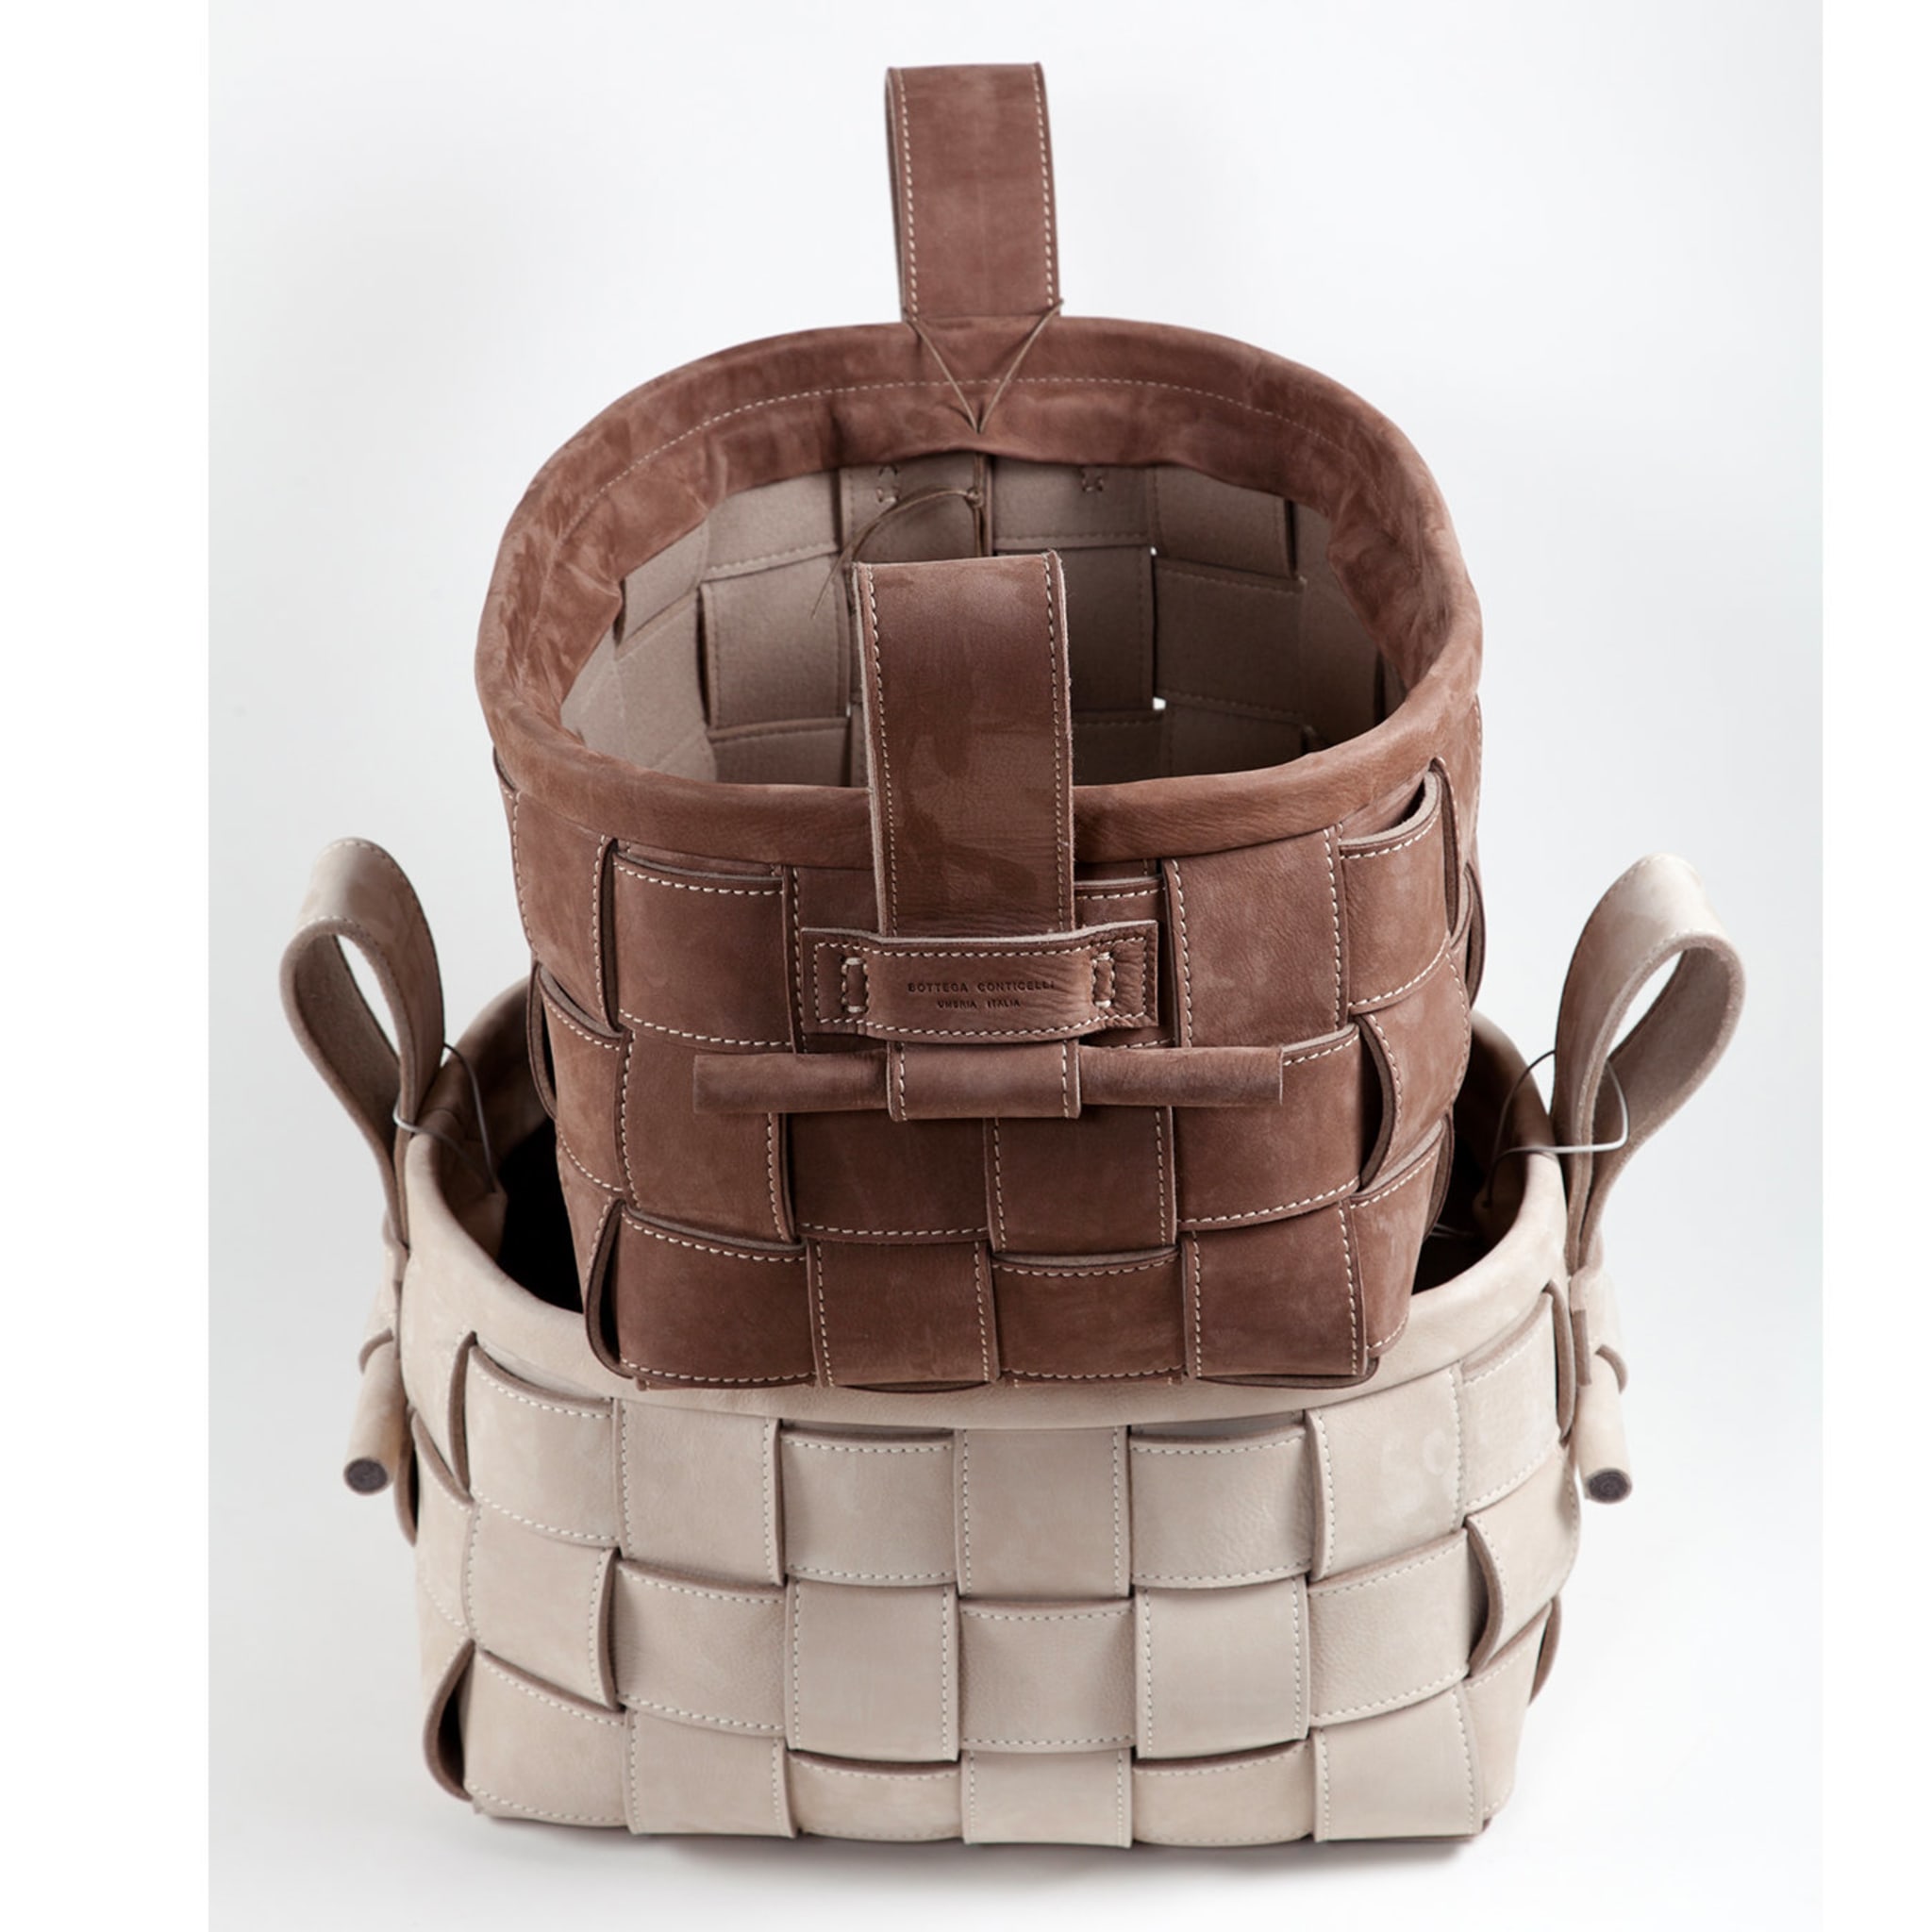 Woven Leather Basket Brown - Alternative view 3